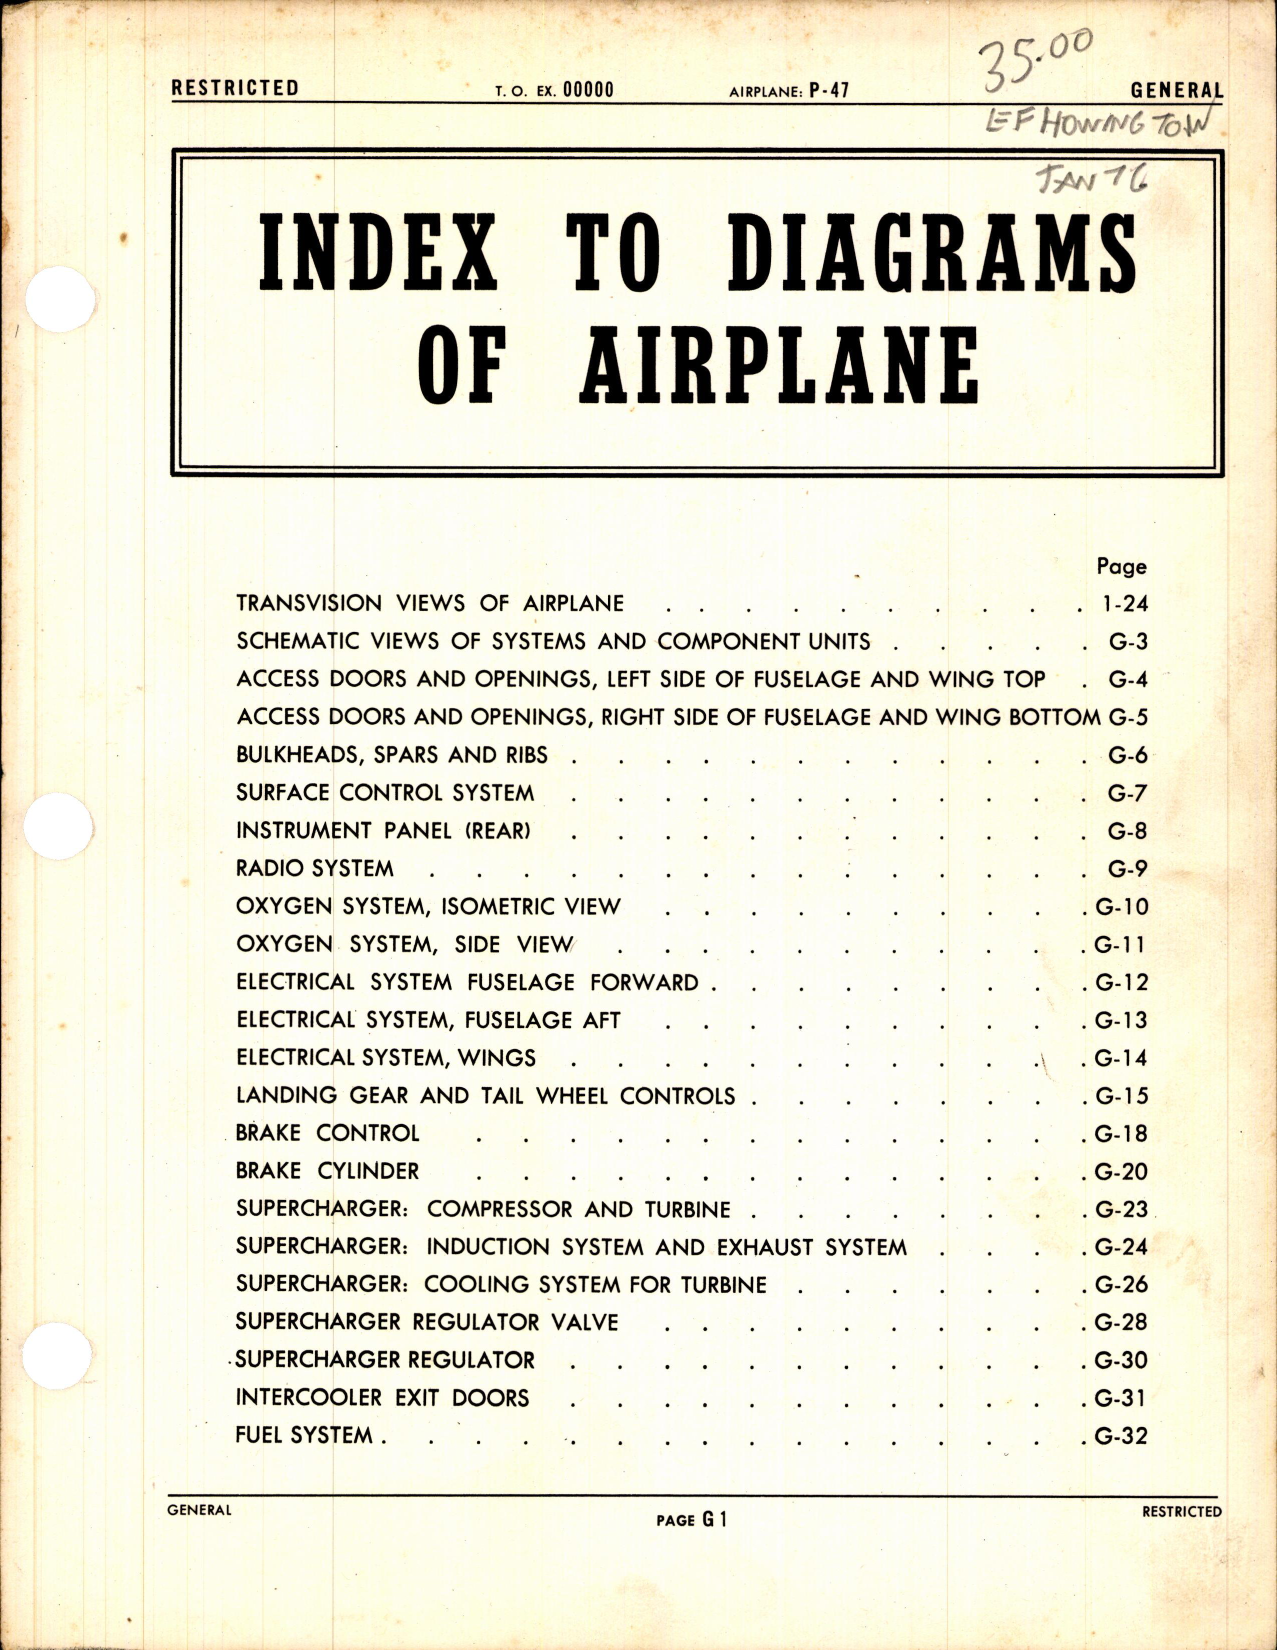 Sample page 1 from AirCorps Library document: Schematic Views of Systems, Components, Units, Ect, for P-47